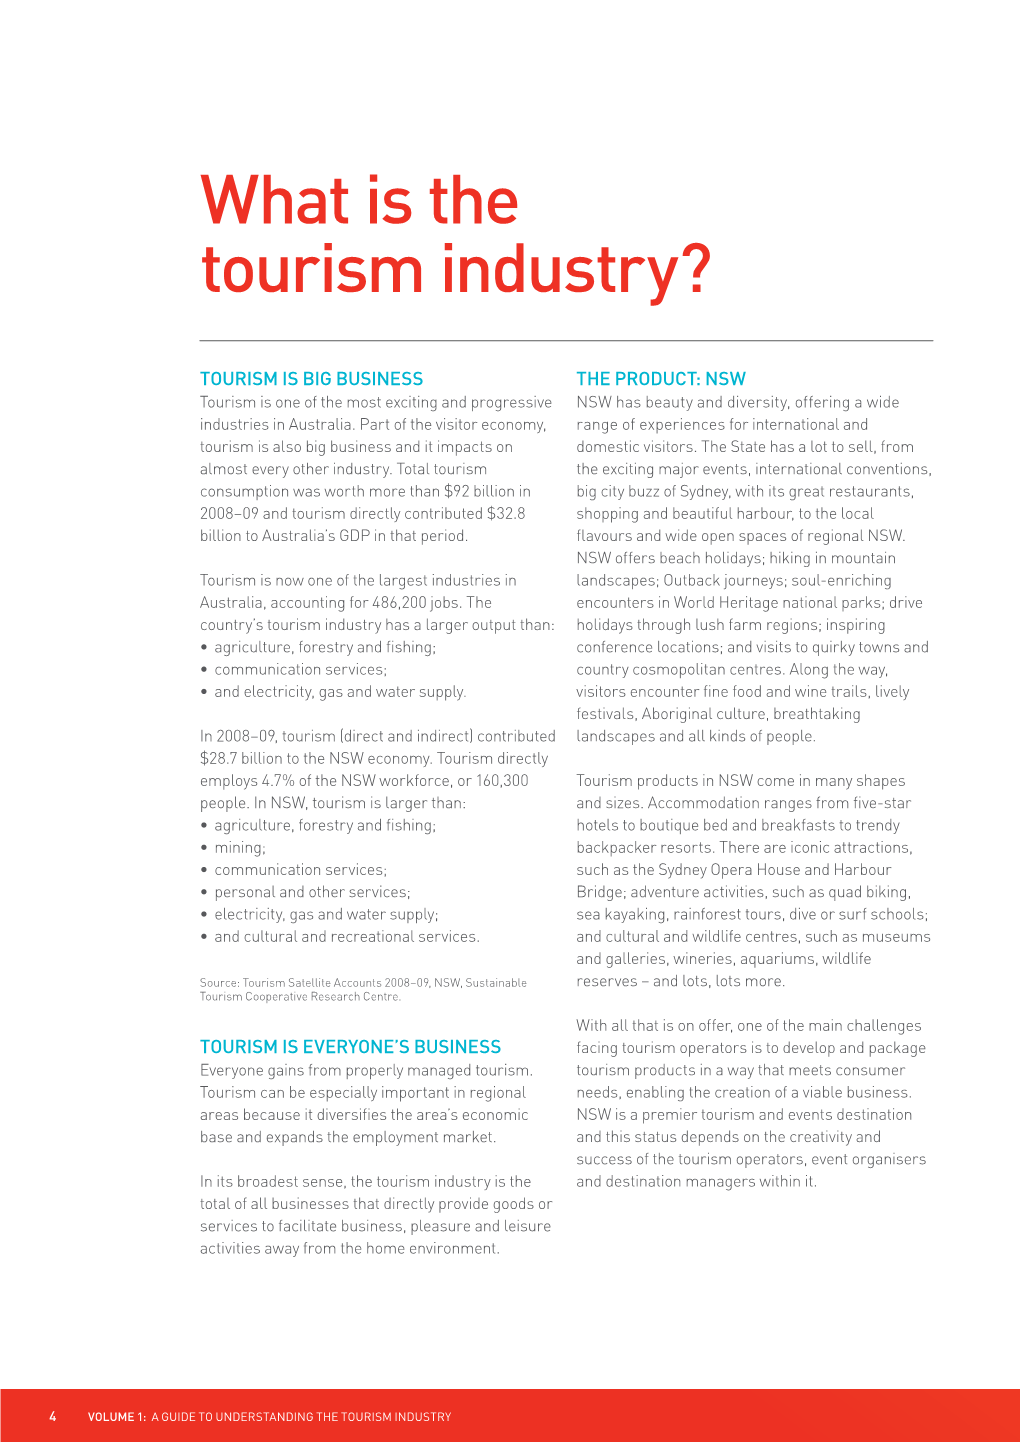 What Is the Tourism Industry?